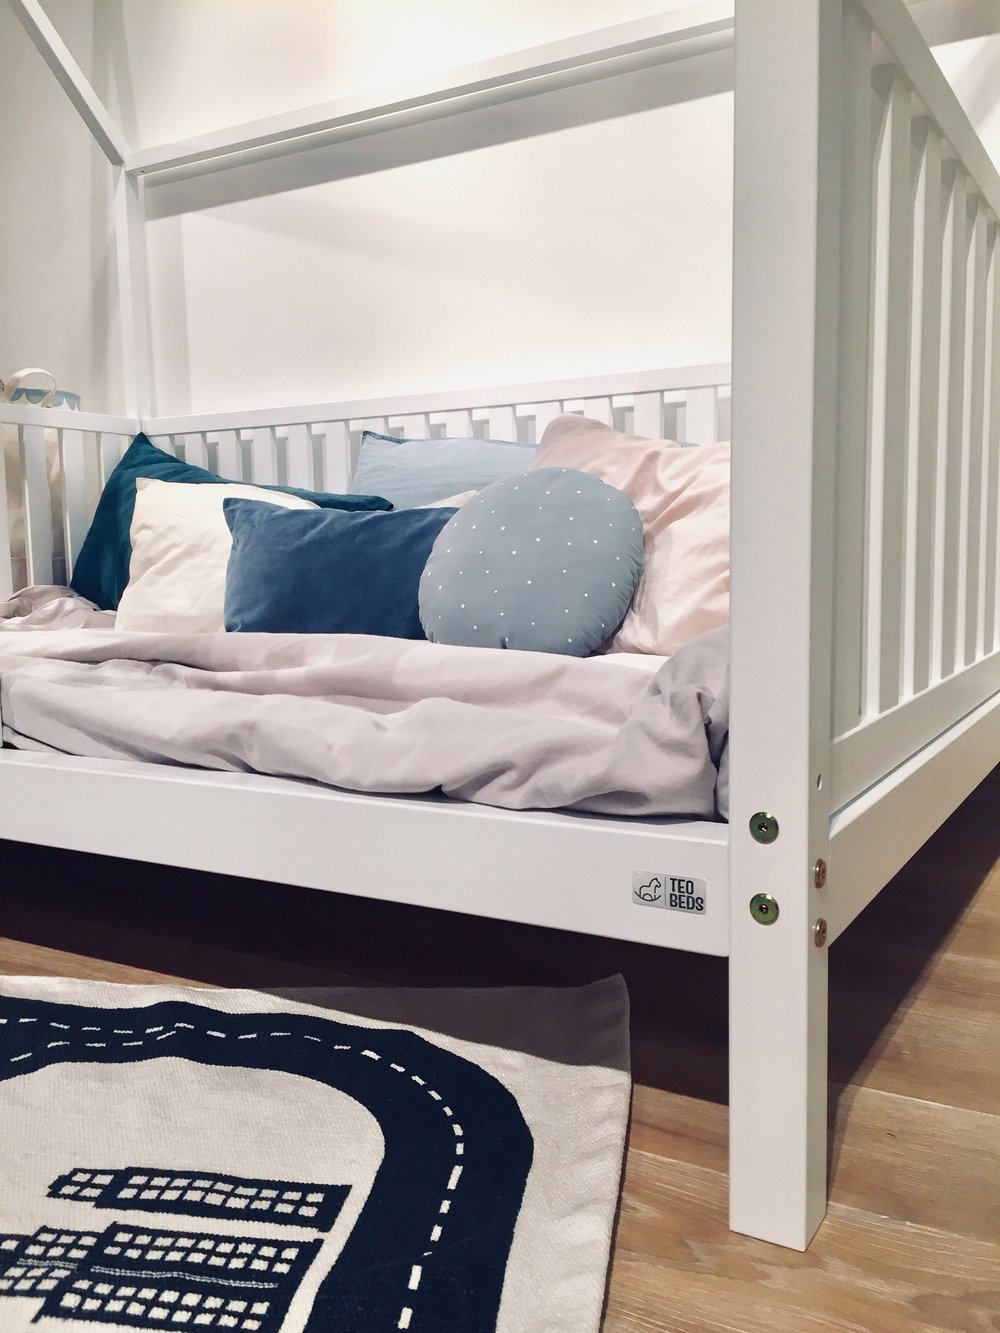 KING Size 76x80" kids' bed with bed rails Teo Beds FREE SHIPPING